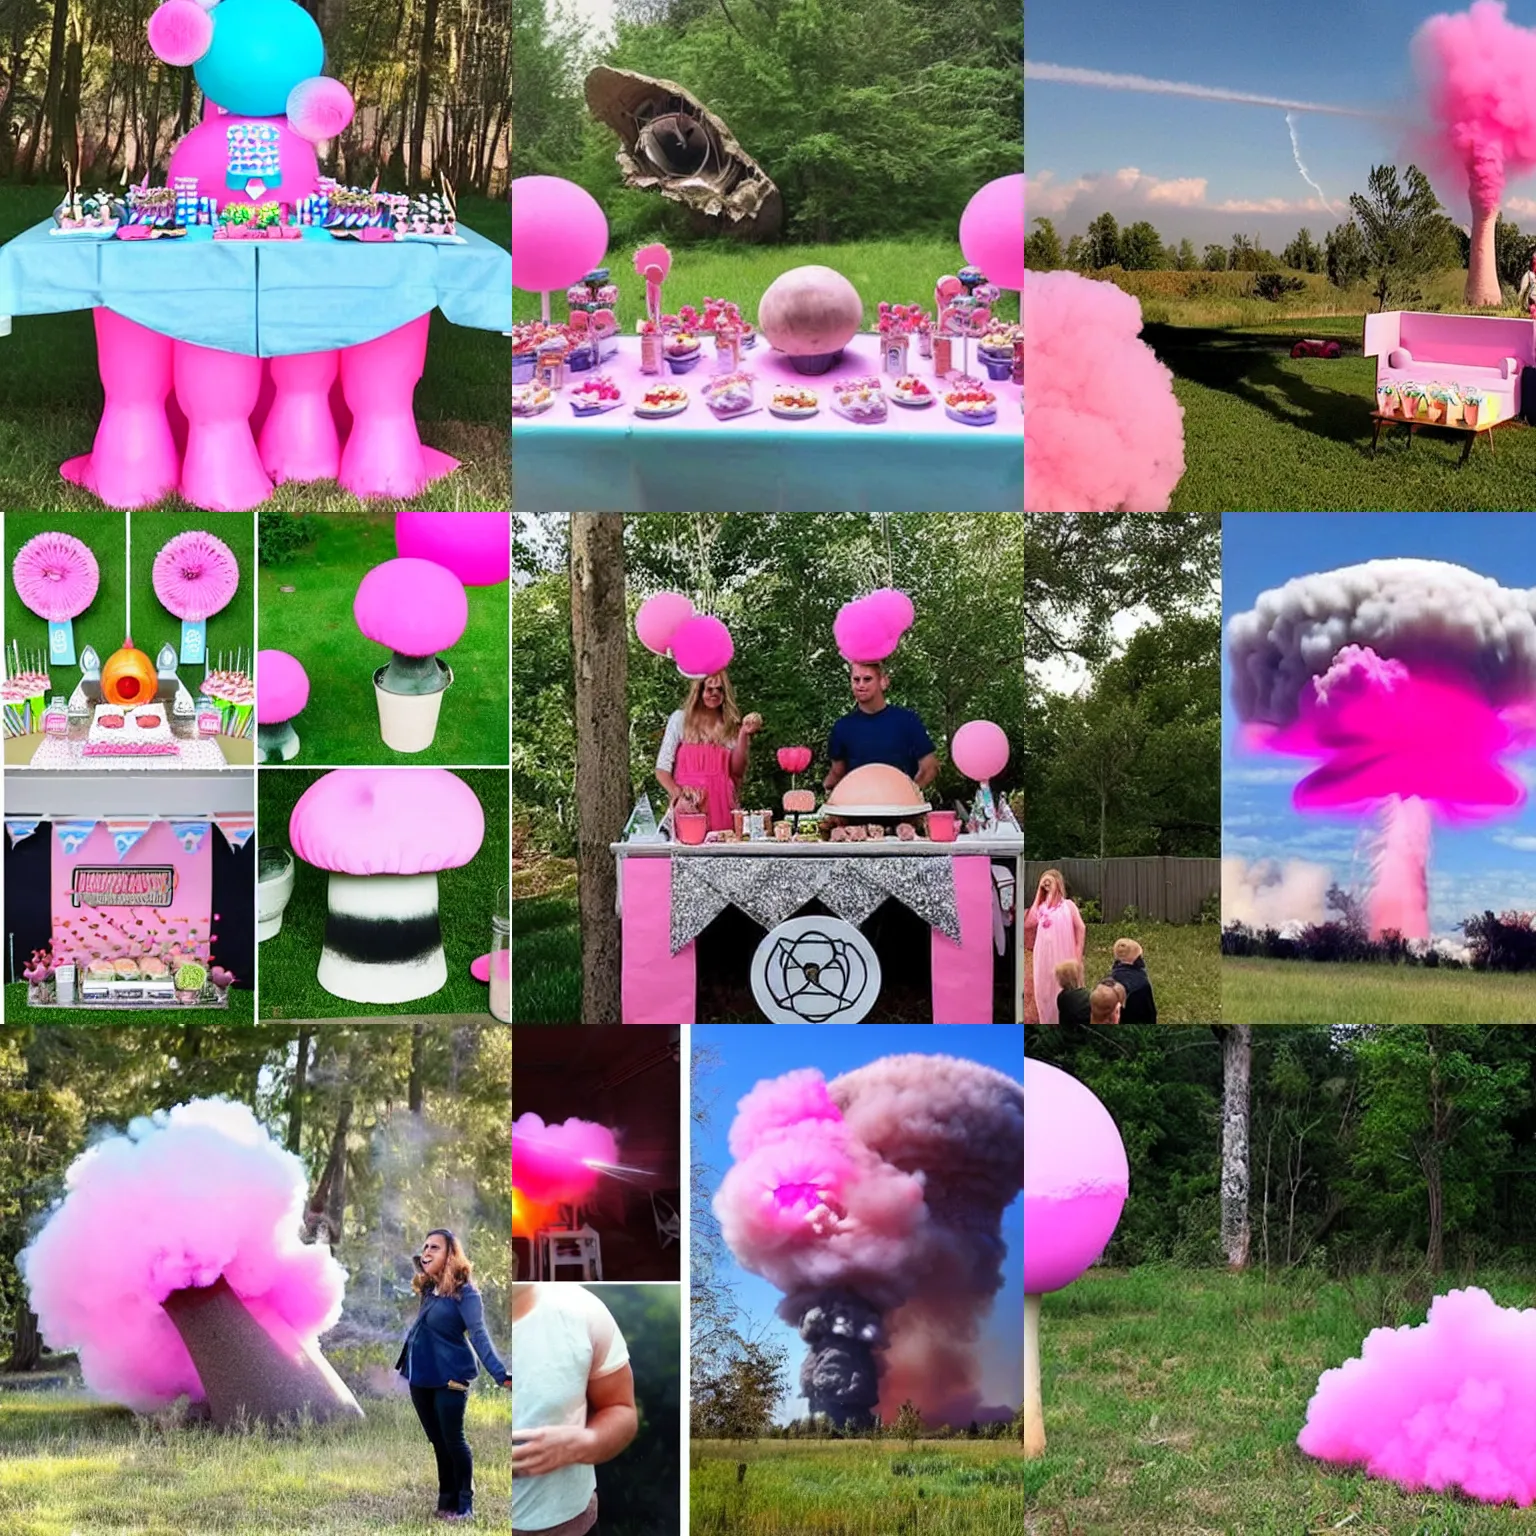 Prompt: gender reveal party goes too far, detonating a nuclear bomb to make a large pink mushroom cloud